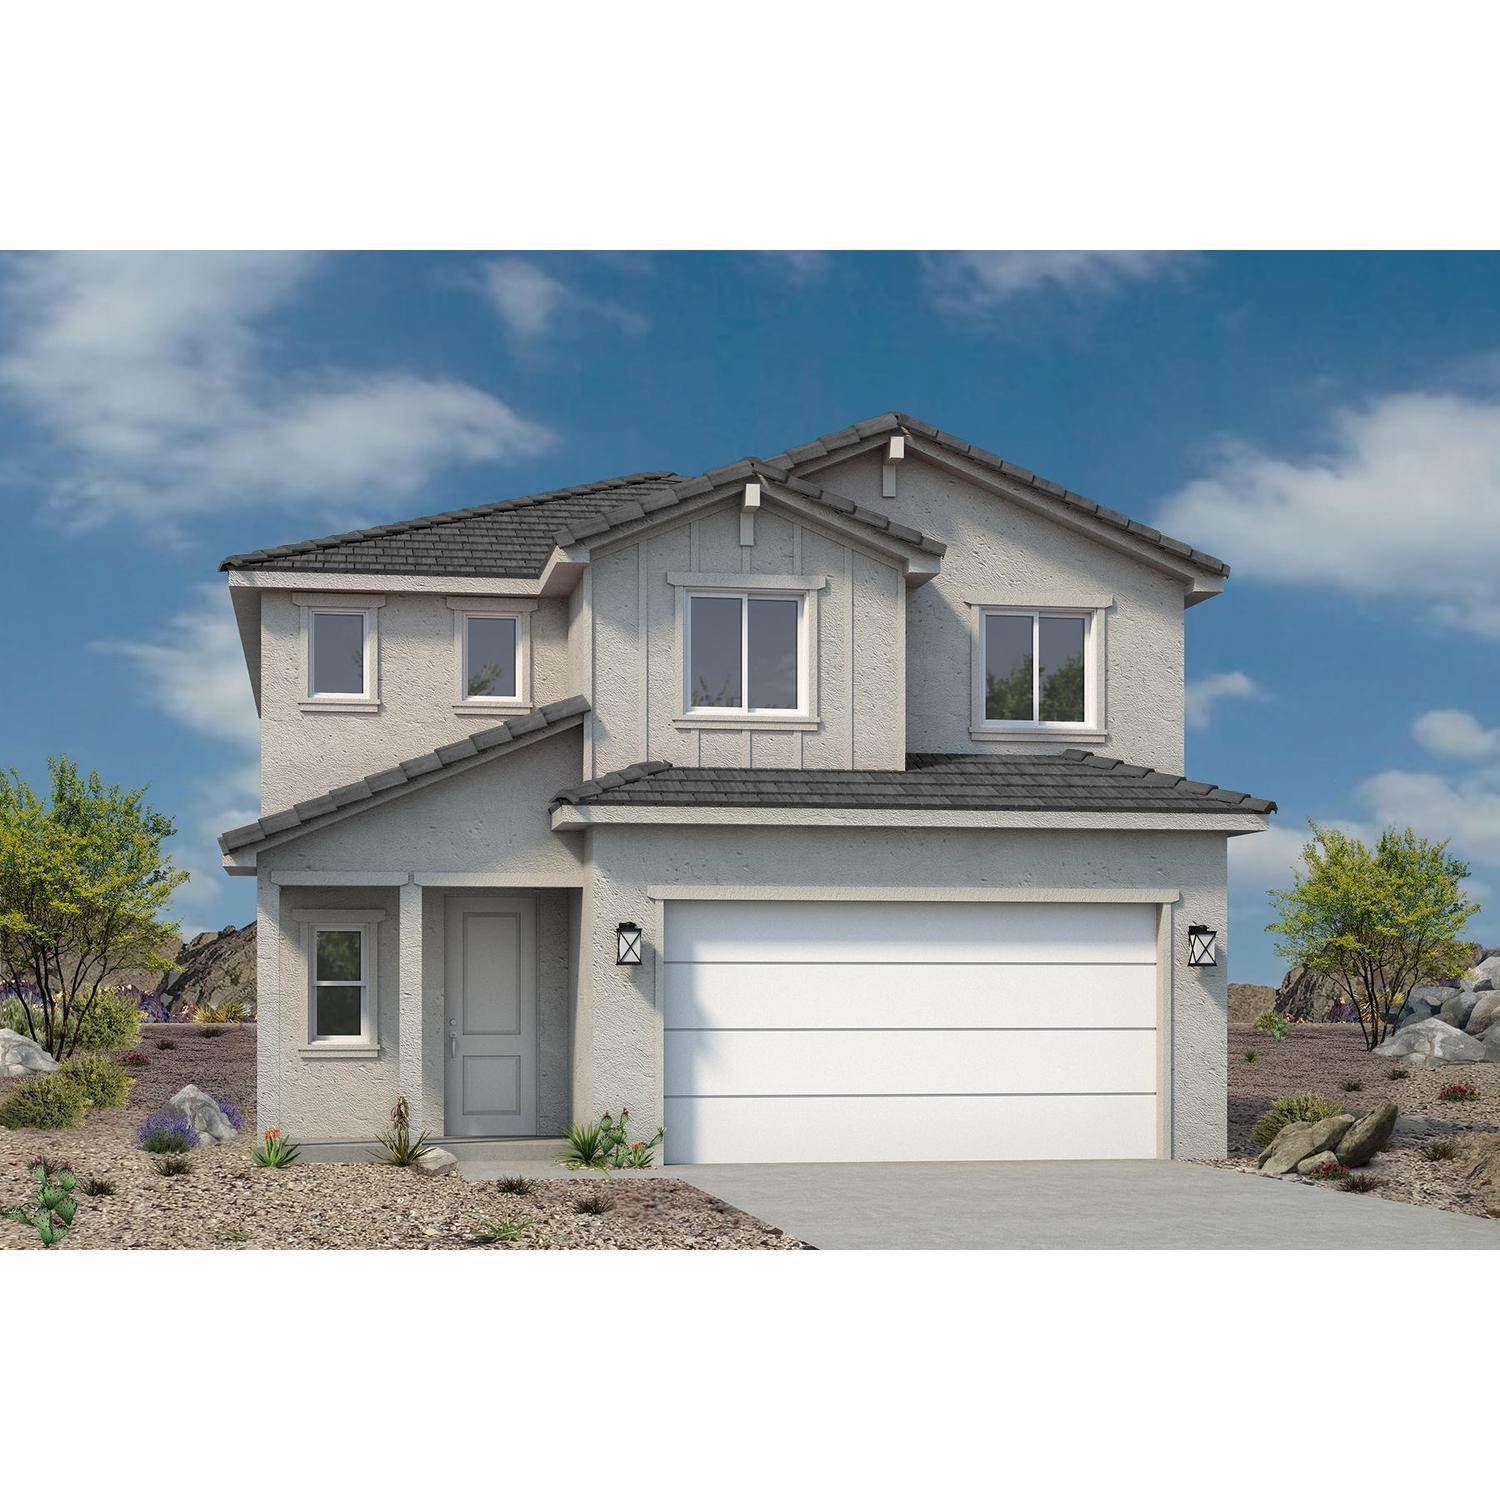 Single Family for Sale at Red Trails 498 S. Deep Creek Dr., Washington, UT 84780